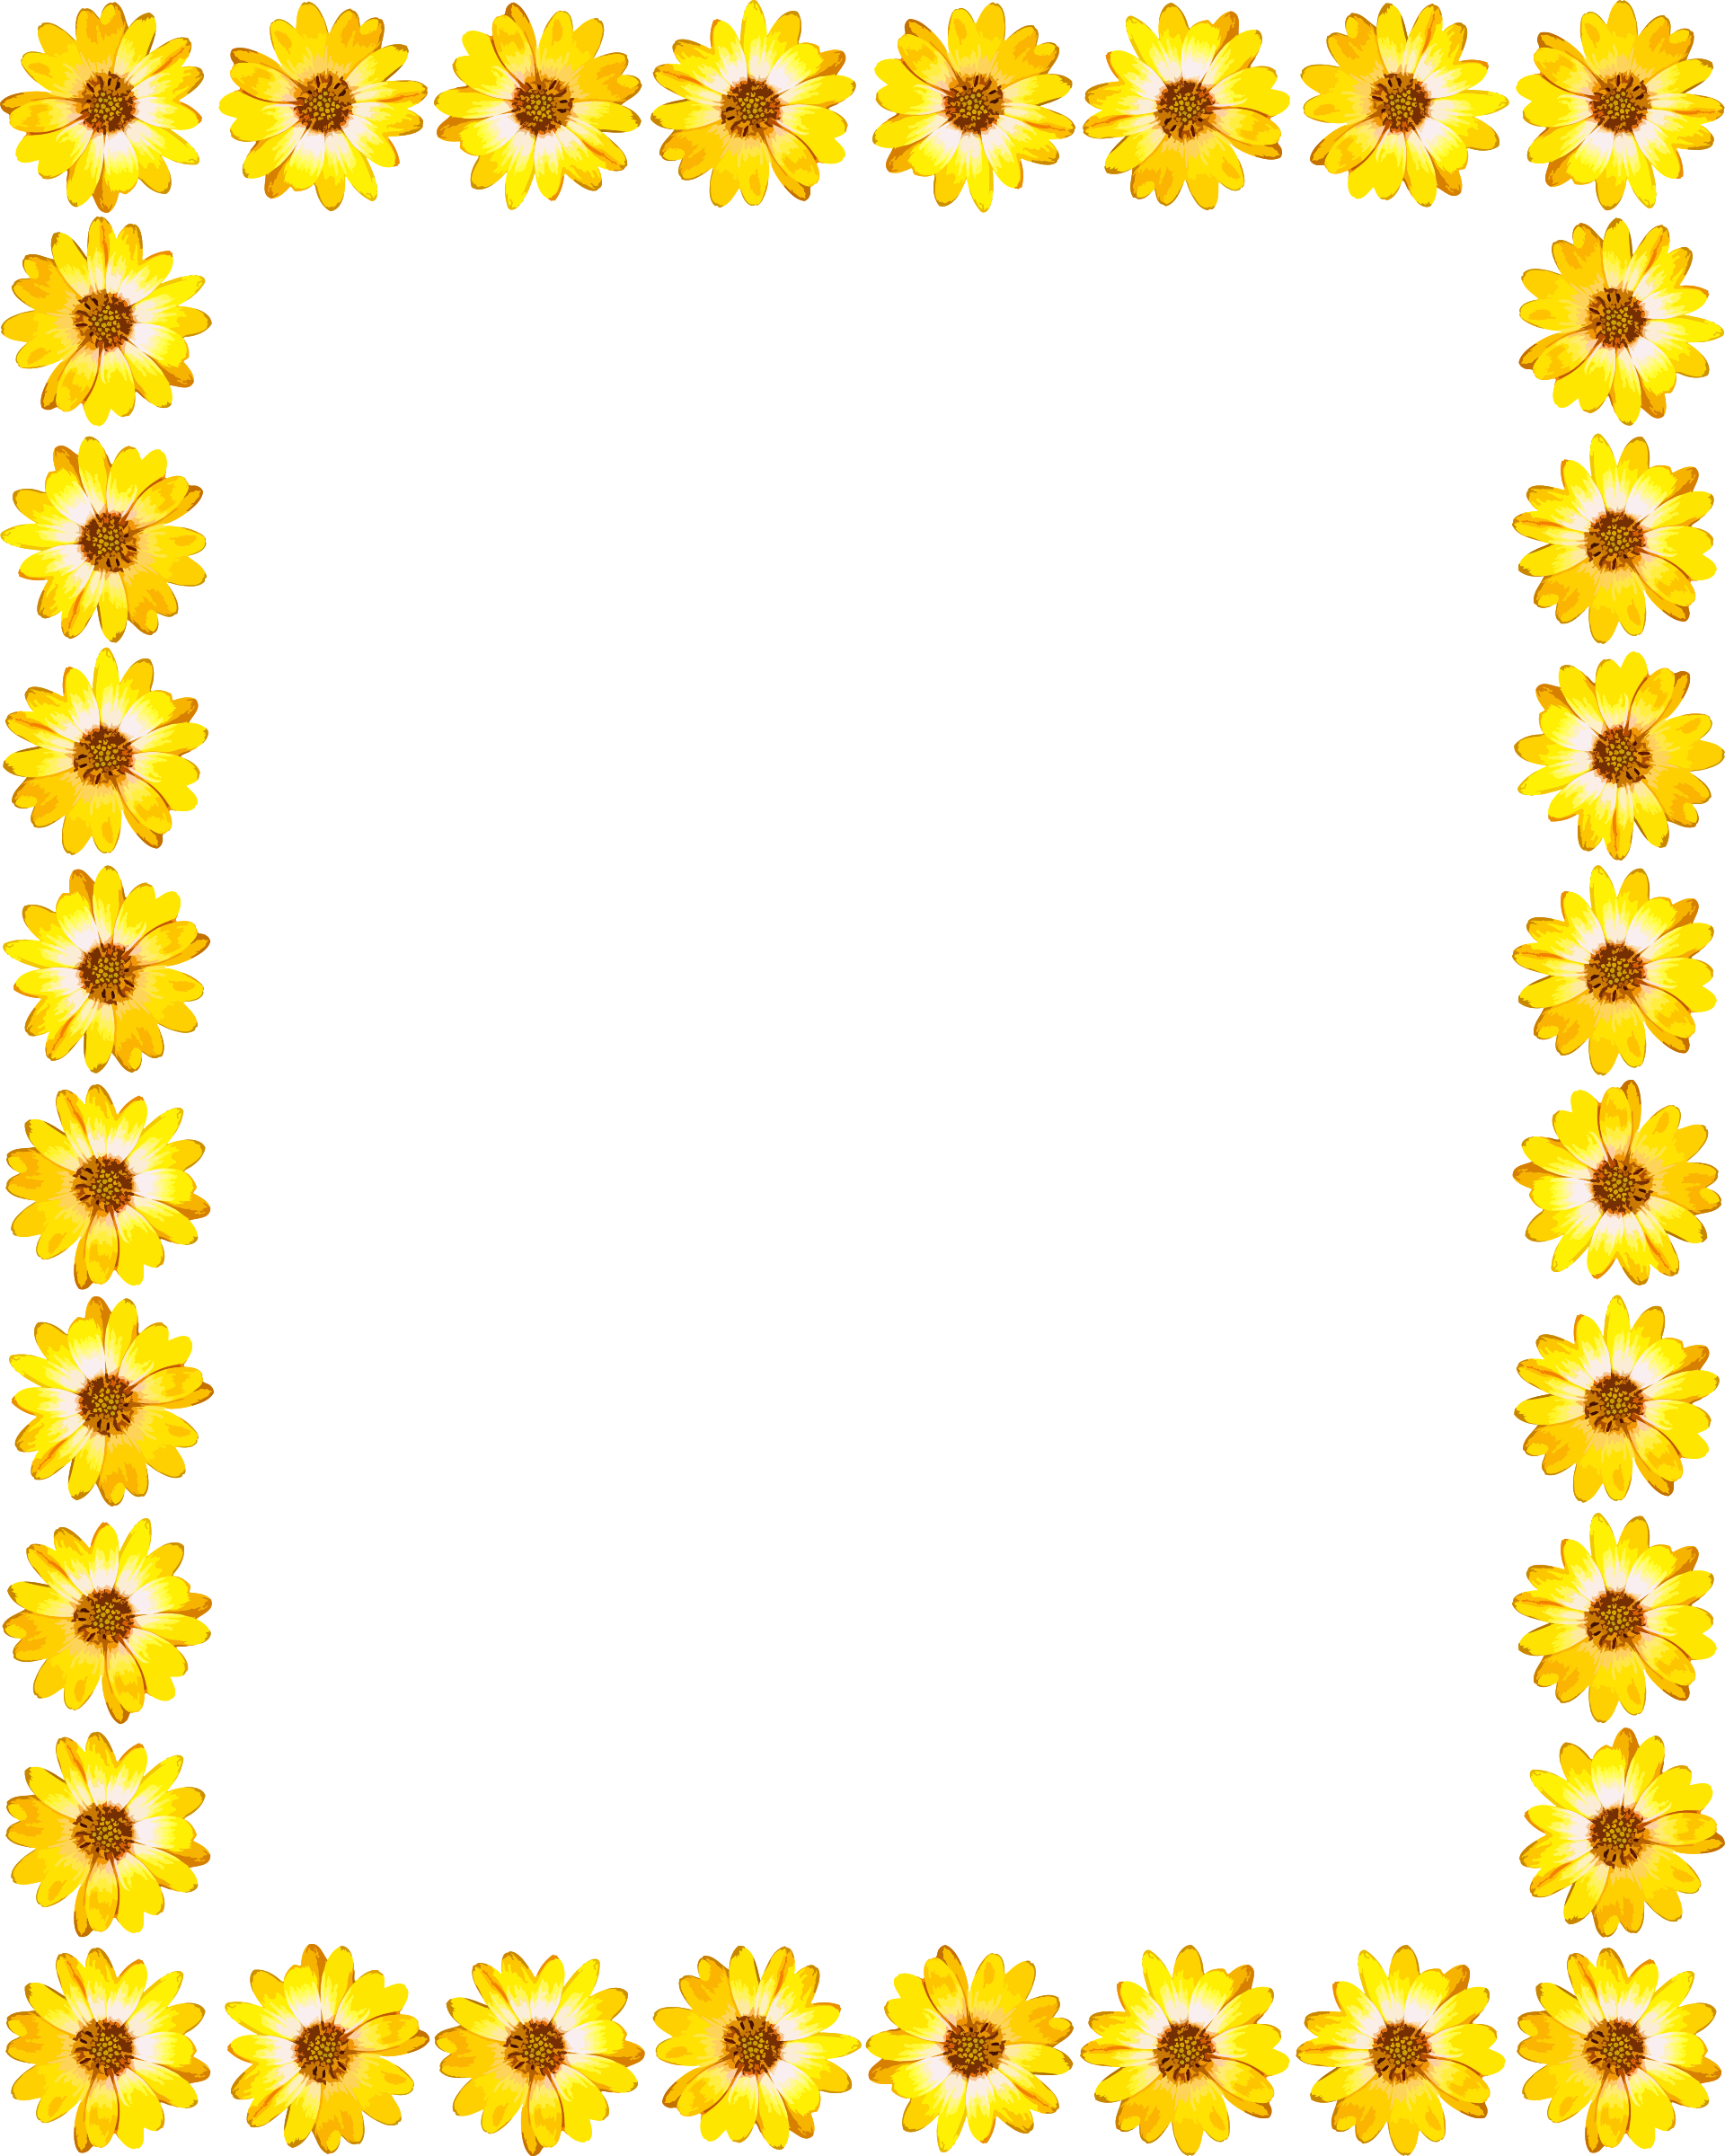 clipart about Big Image - Yellow Star Border Clipart, Find more high qualit...